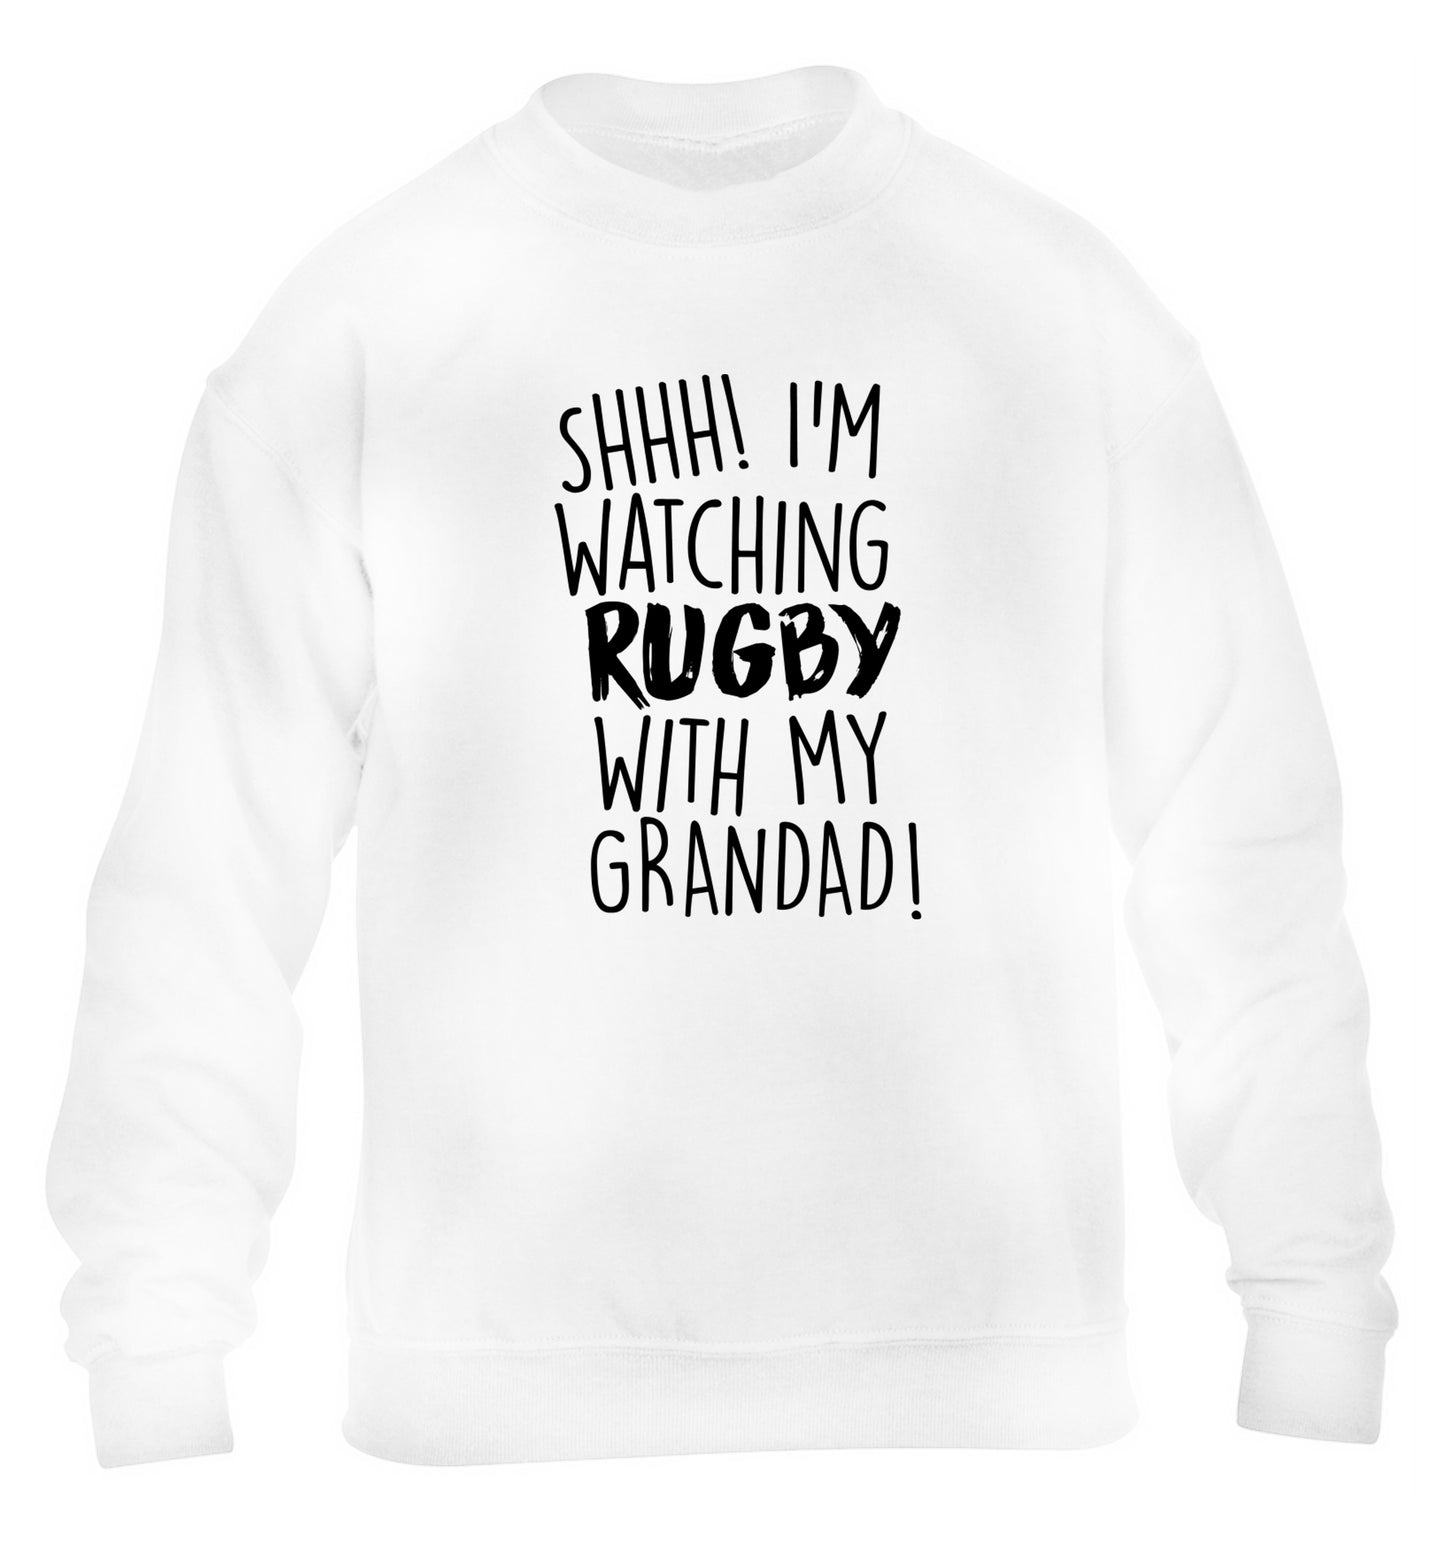 Shh I'm watching rugby with my grandad children's white sweater 12-13 Years